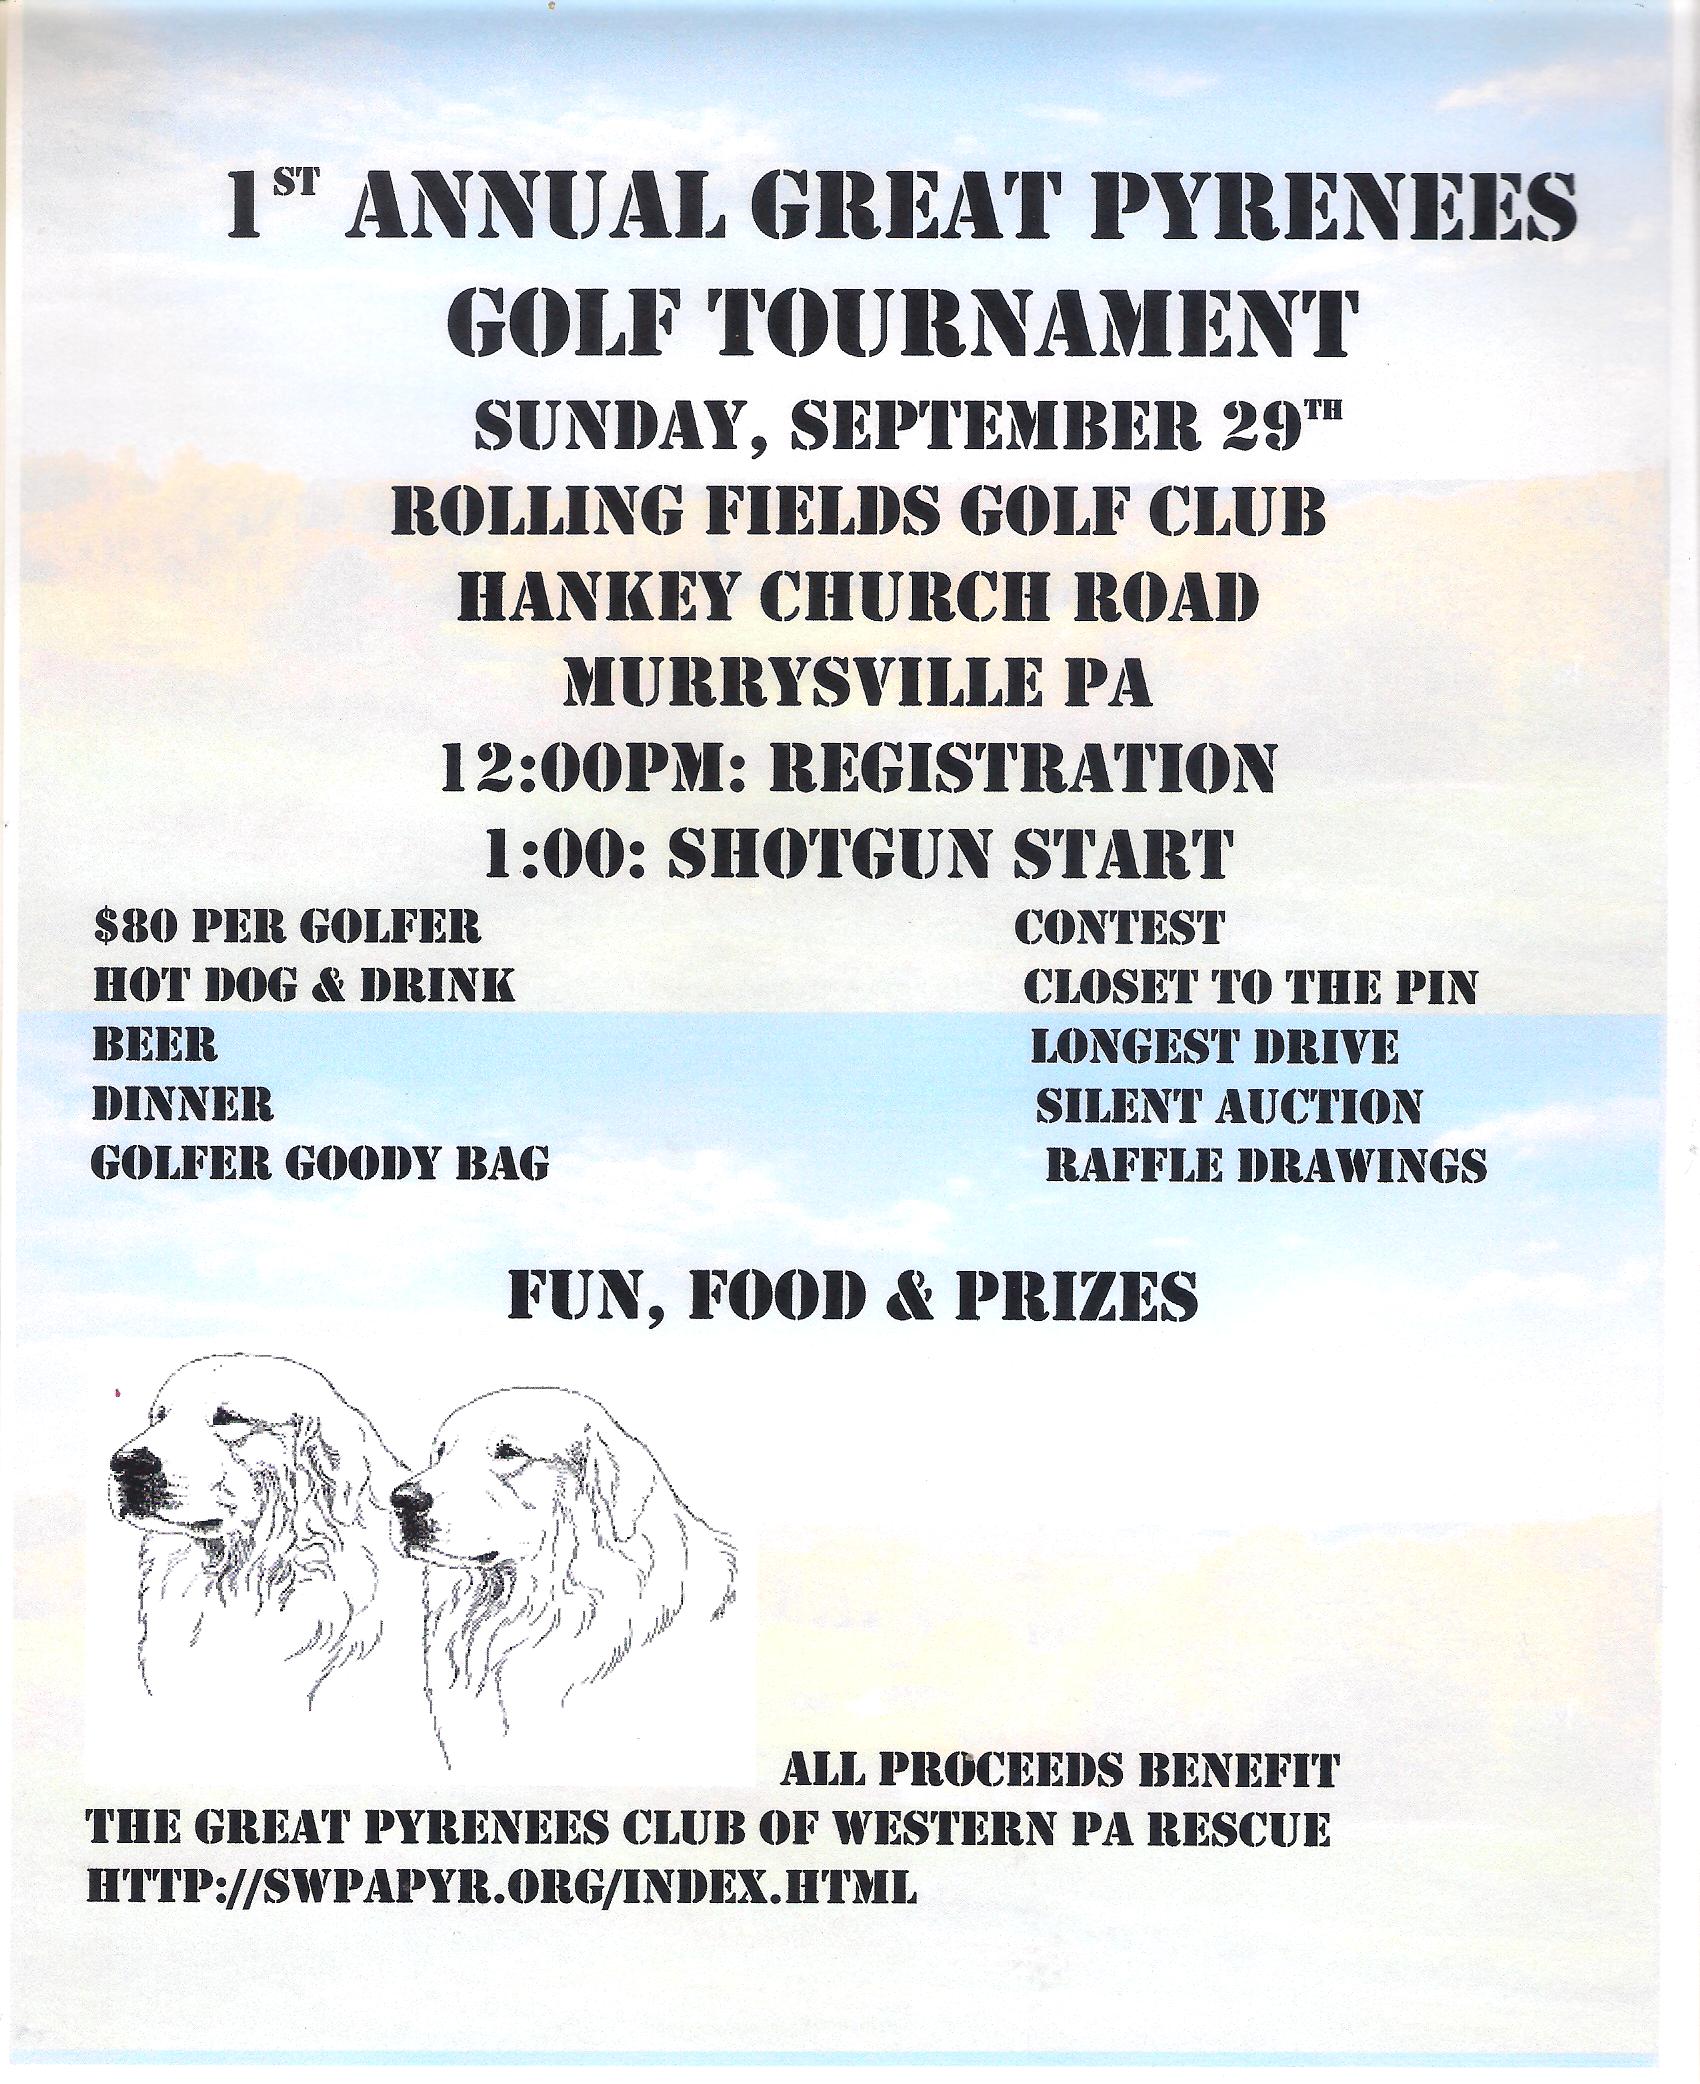 1st Annual Great Pyrenees Golf Tournament